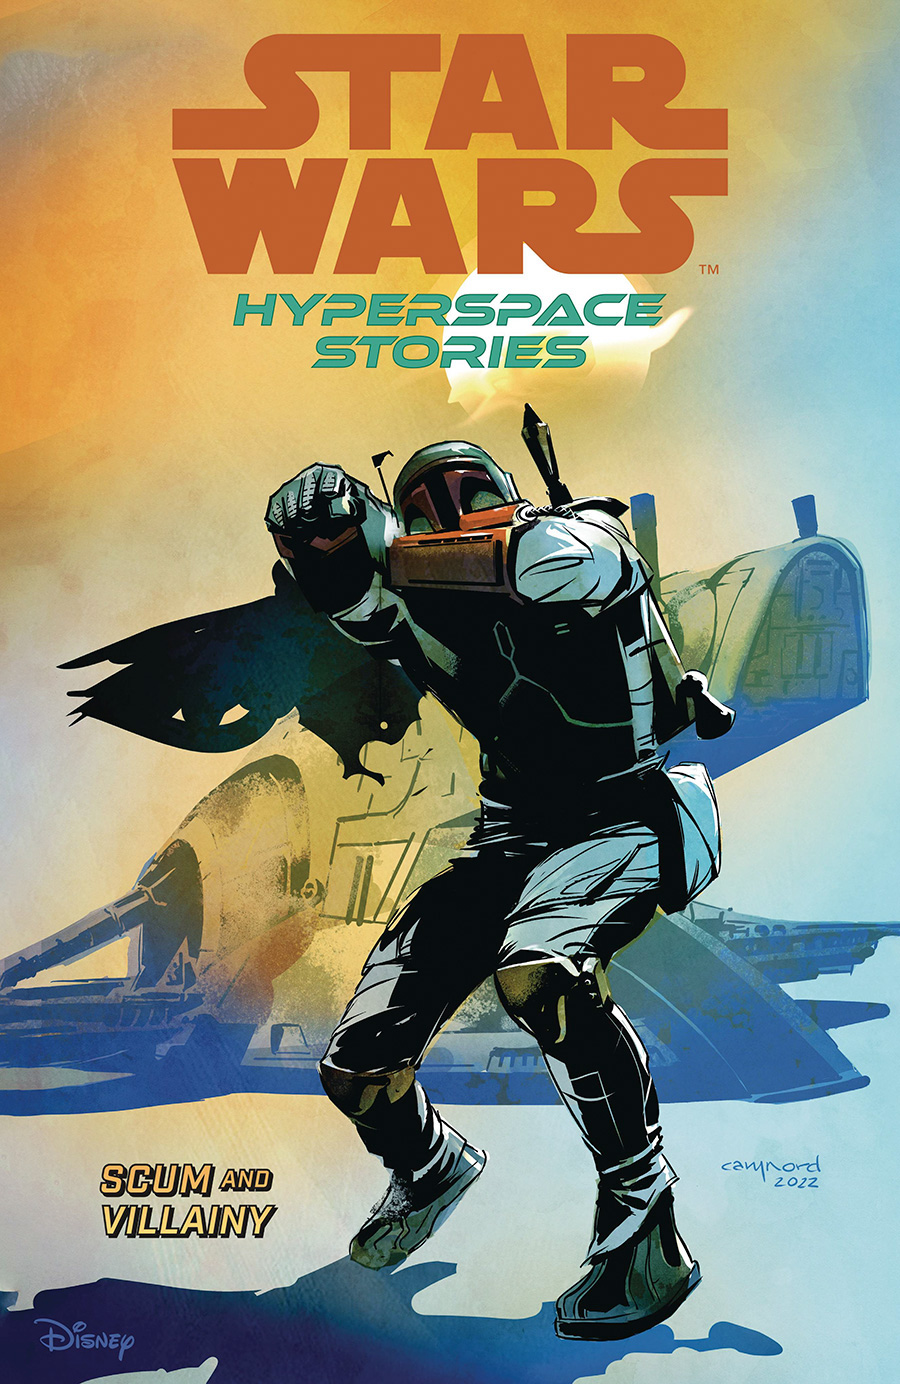 Star Wars Hyperspace Stories Vol 2 Scum And Villainy TP